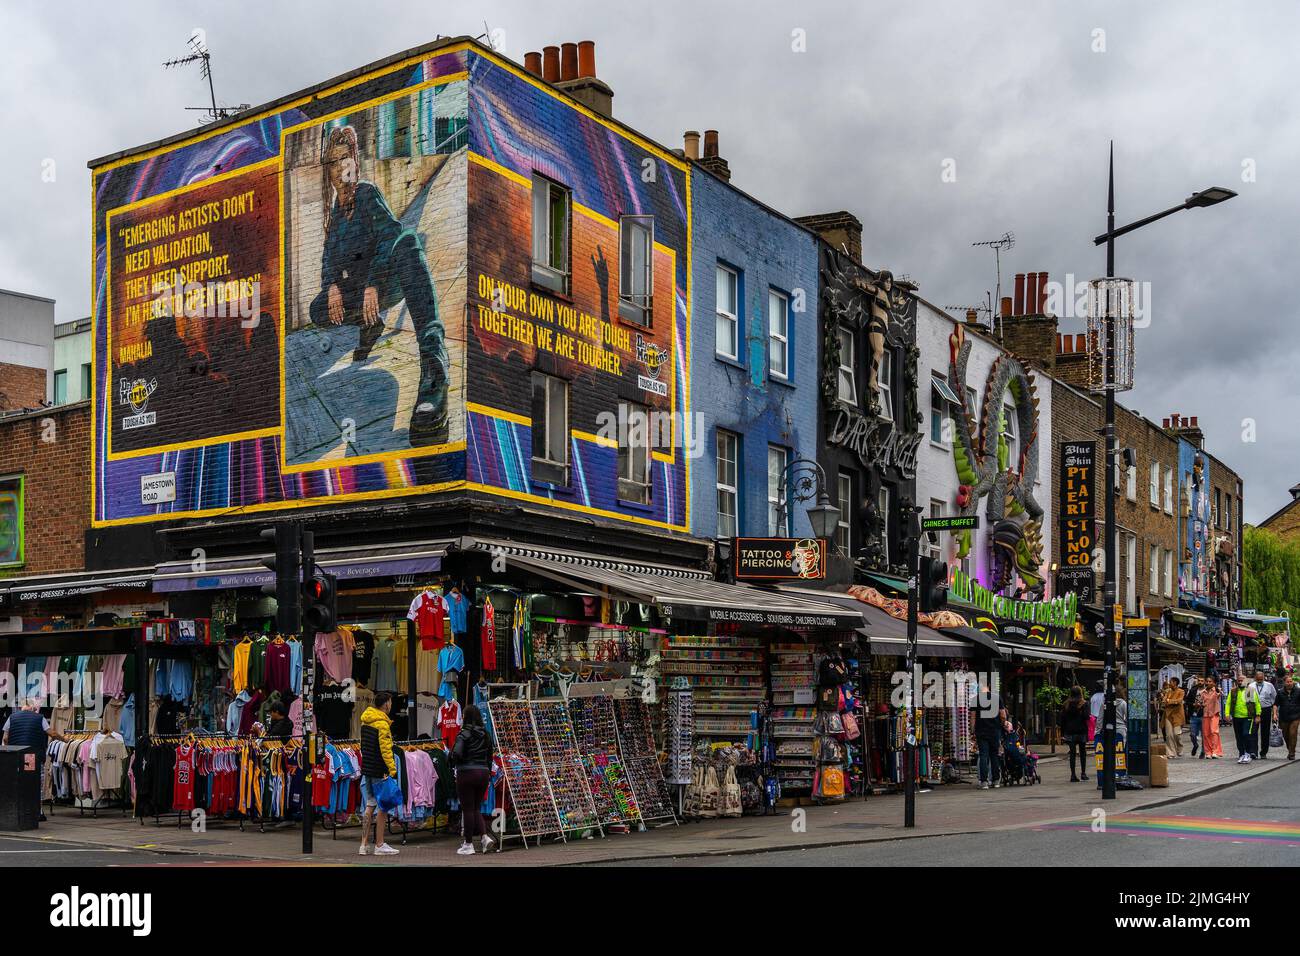 London, UK - Jun 09 2022: Street view of the colorful stores and buildings of Camden Town, London Stock Photo